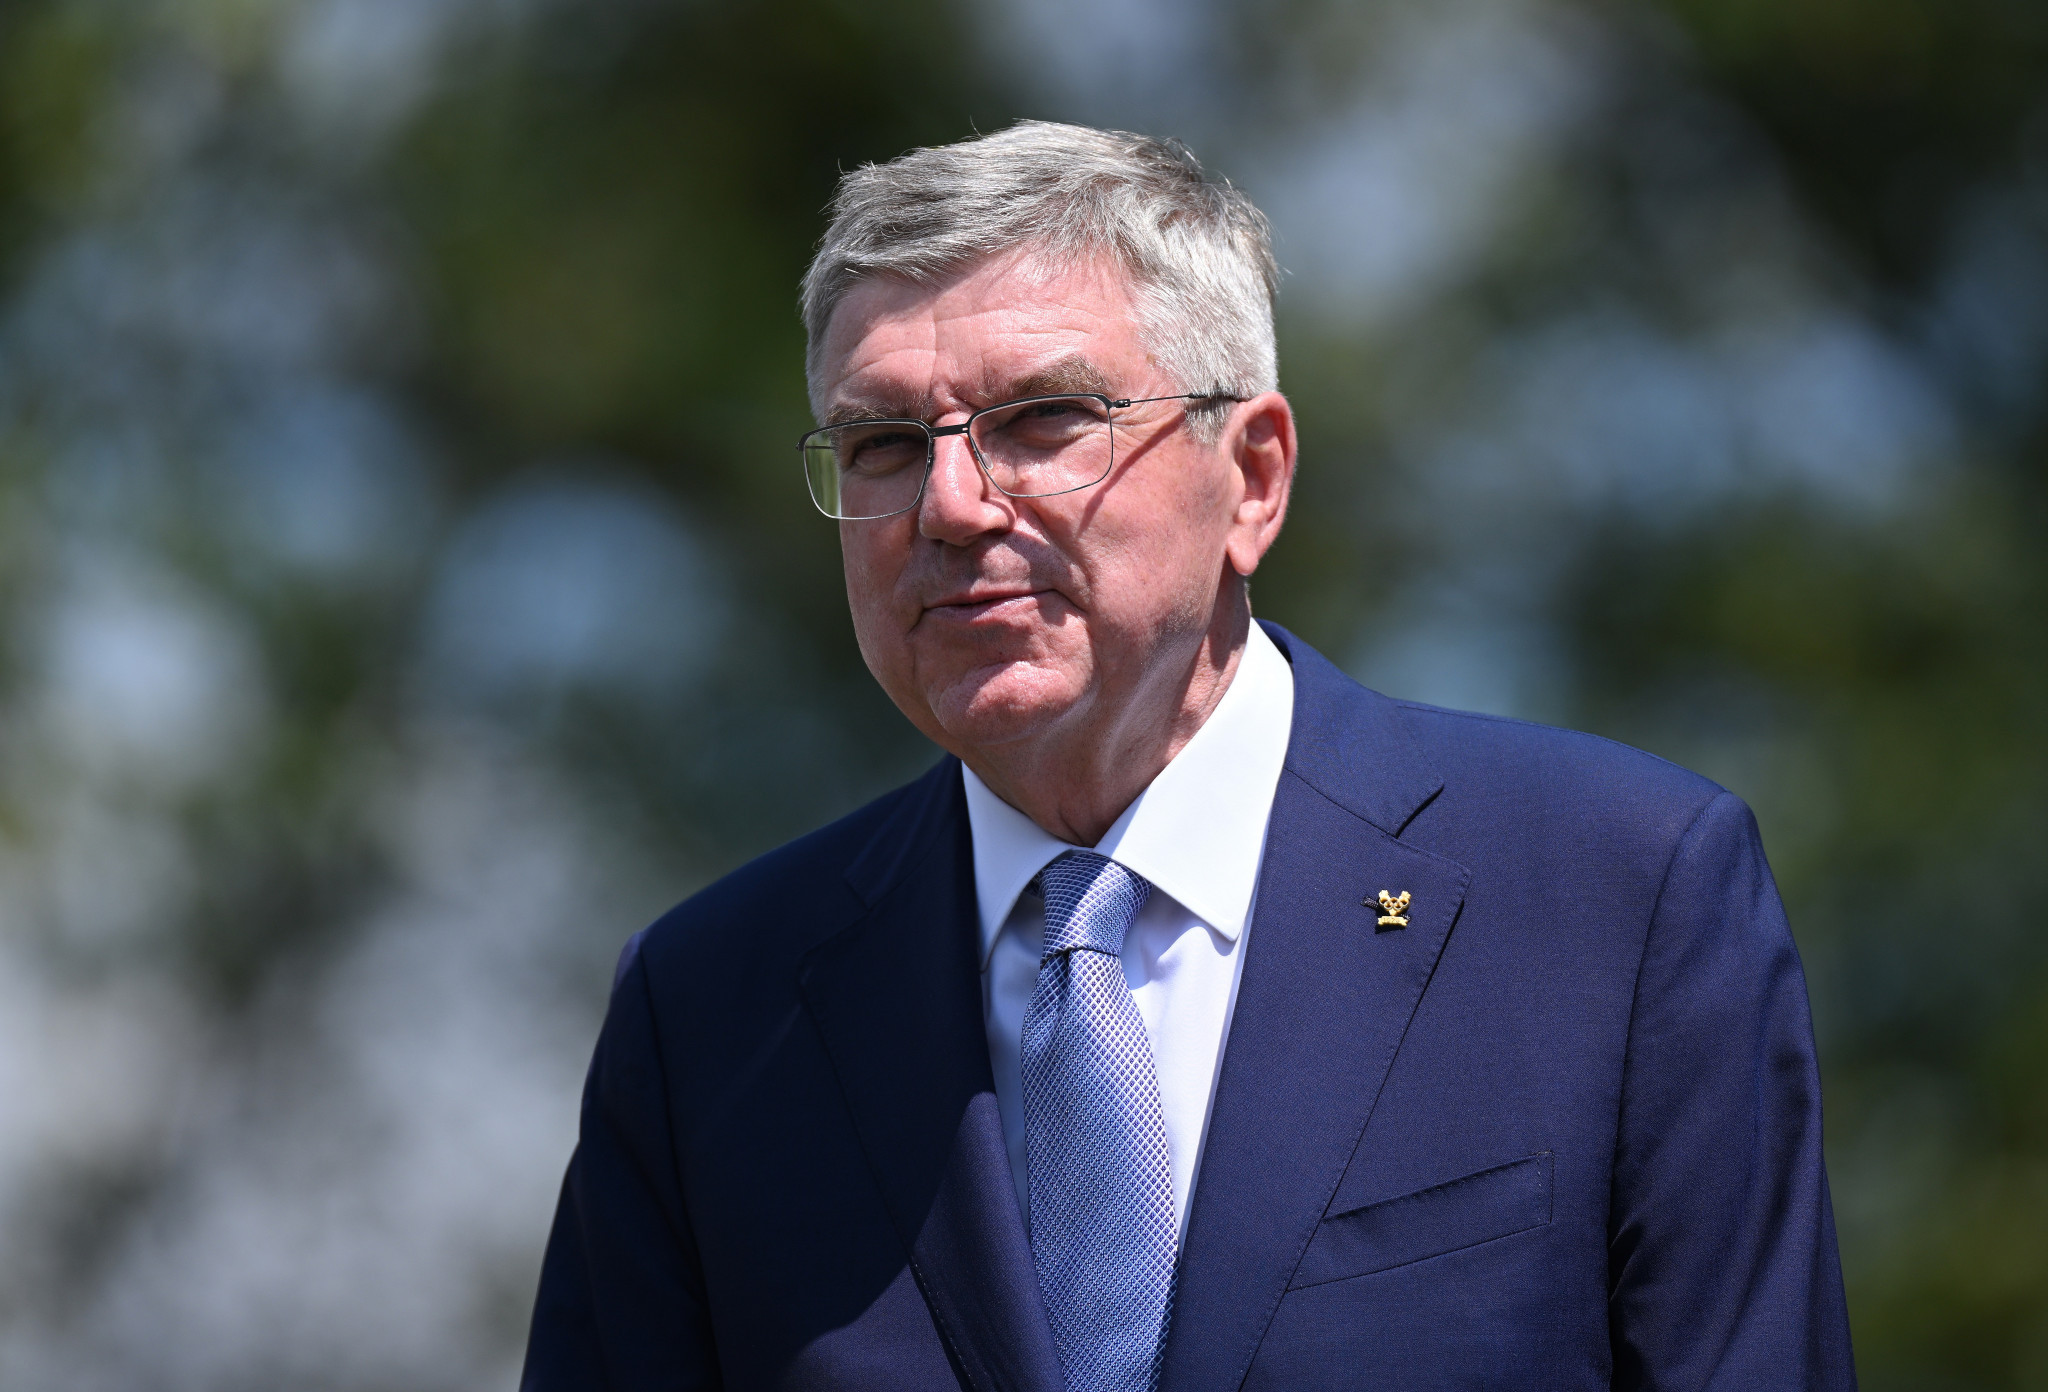 International Olympic Committee President Thomas Bach said that the Olympic Games could 